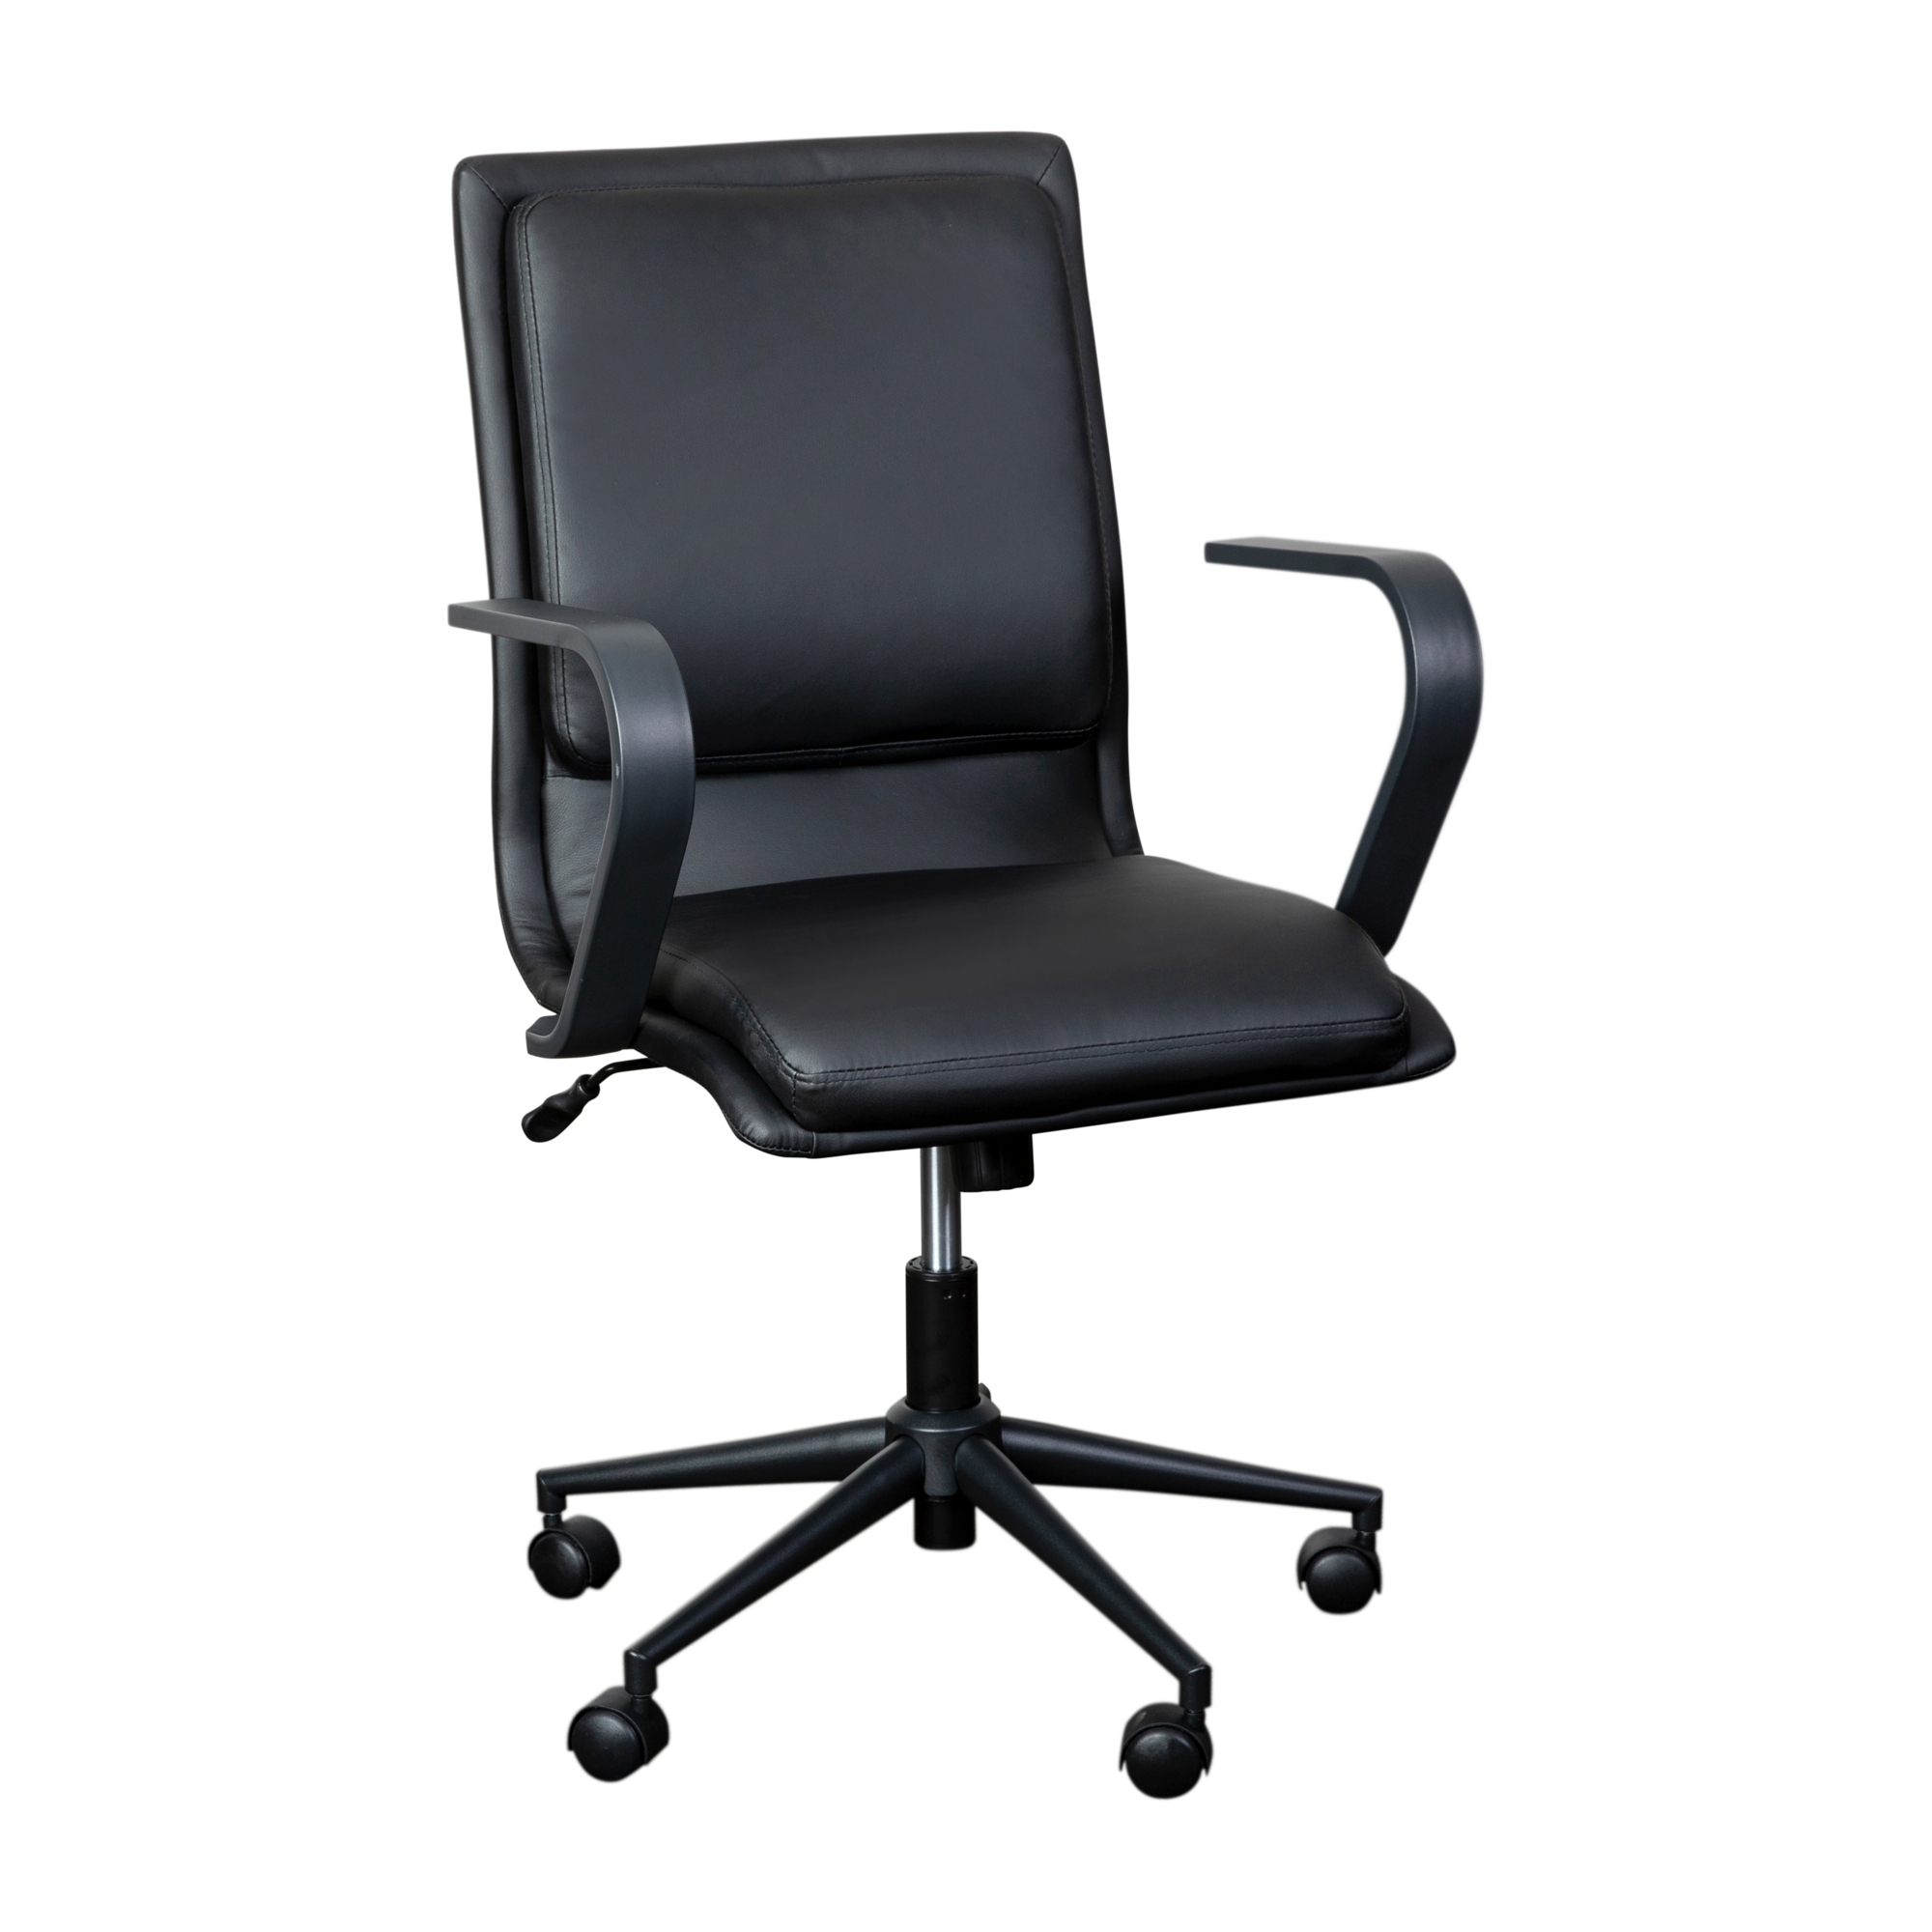 Flash Furniture, Black LeatherSoft Office Chair with Black Arms, Primary Color Black, Included (qty.) 1, Model GO21111BBKBK